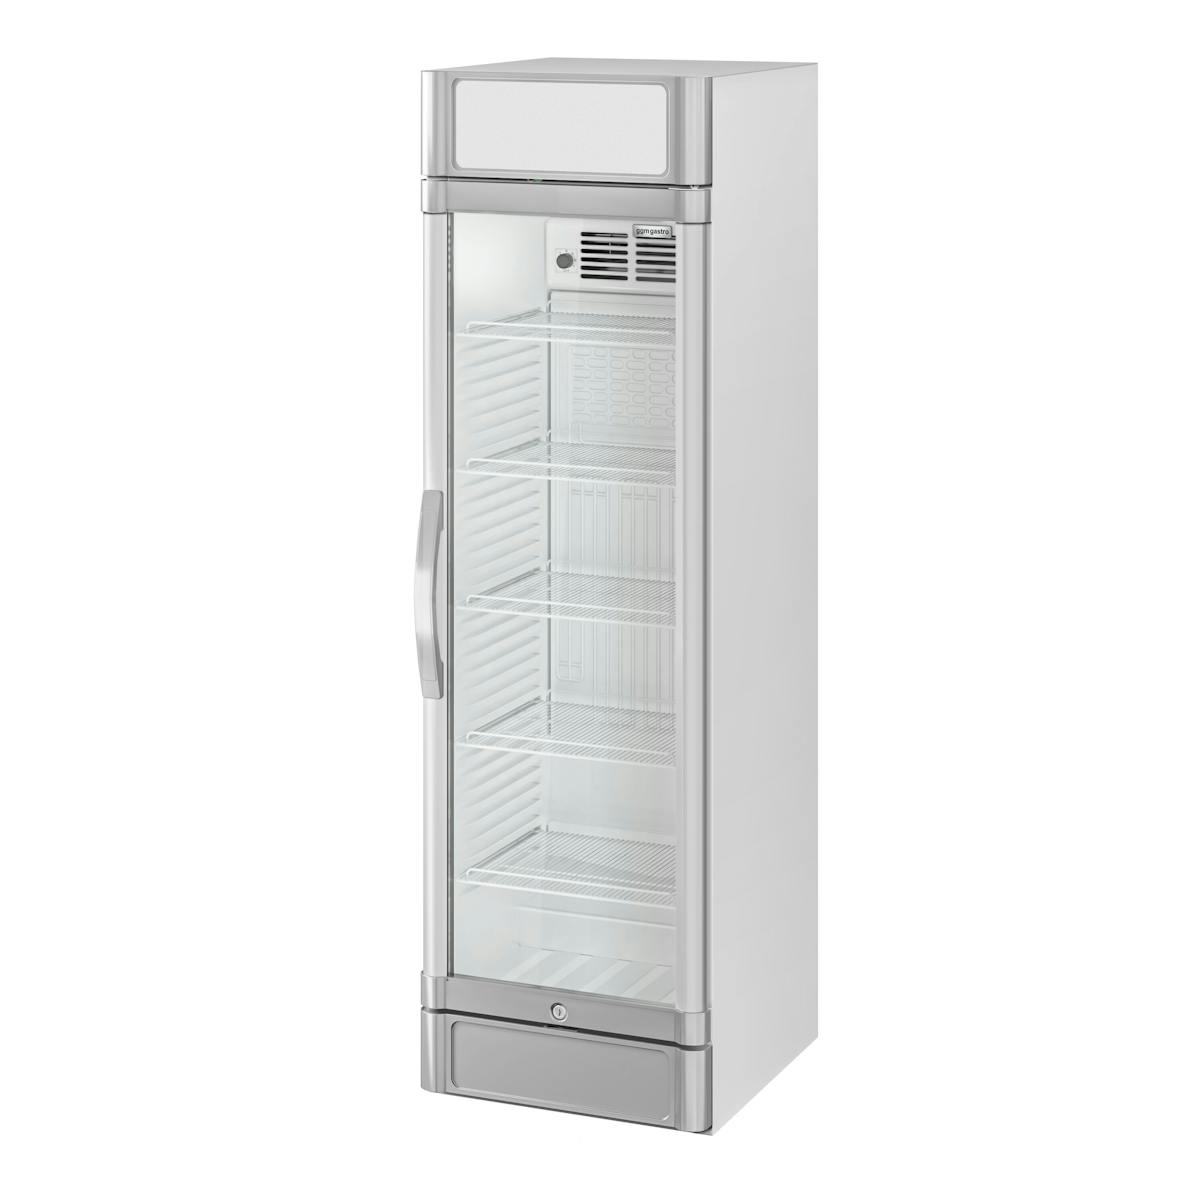 Beverage refrigerator - 347 litres - with advertising display